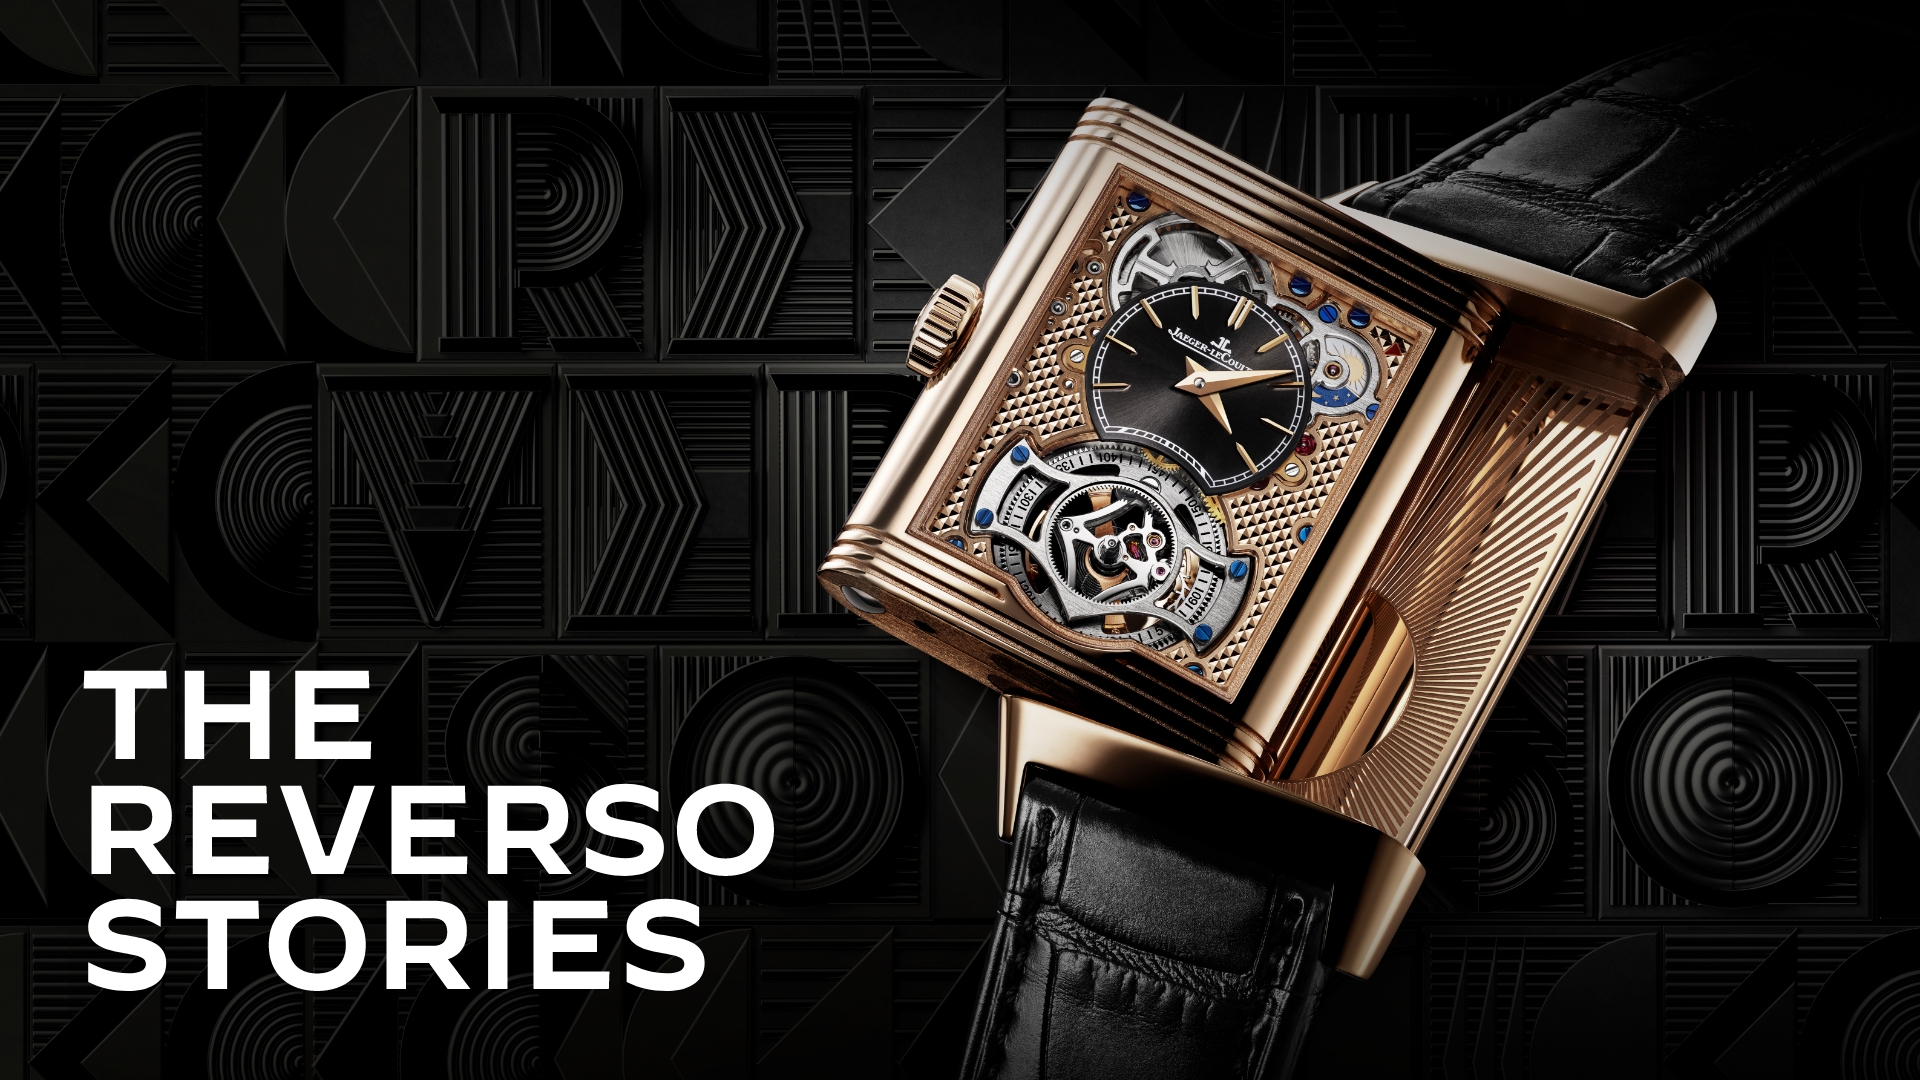 A Jaeger-LeCoultre 'Reverso' watch and text that reads 'The Reverso Stories'